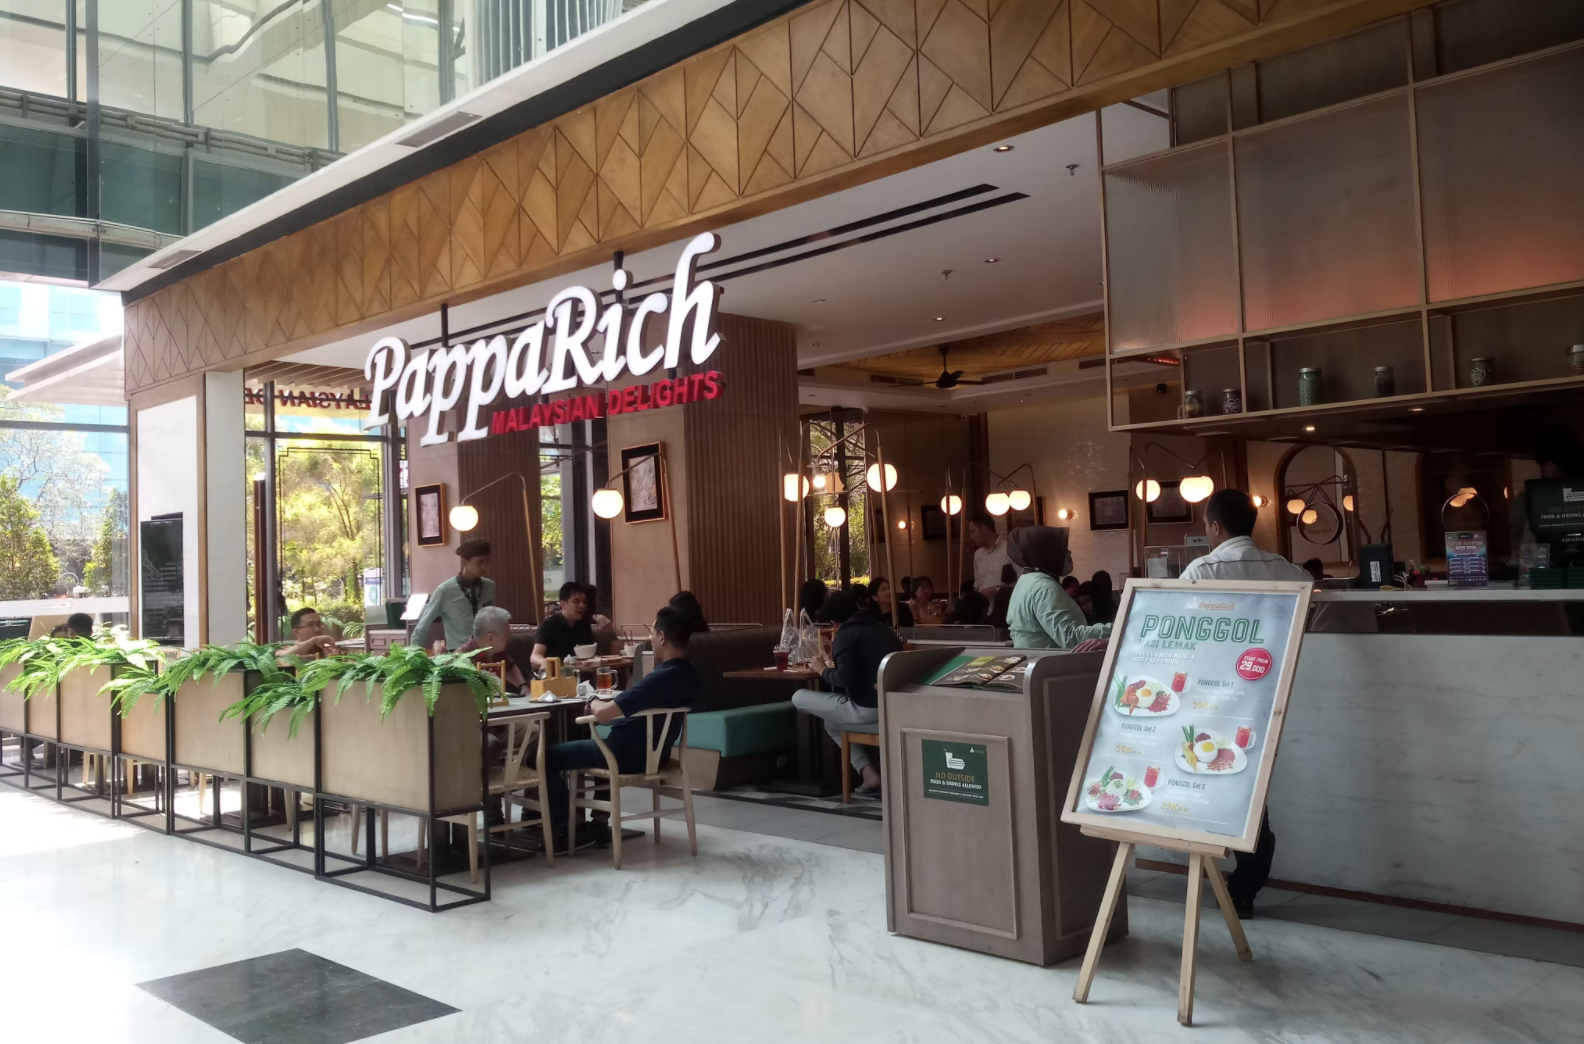 Papparich shop front in lippo mall puri st. moritz